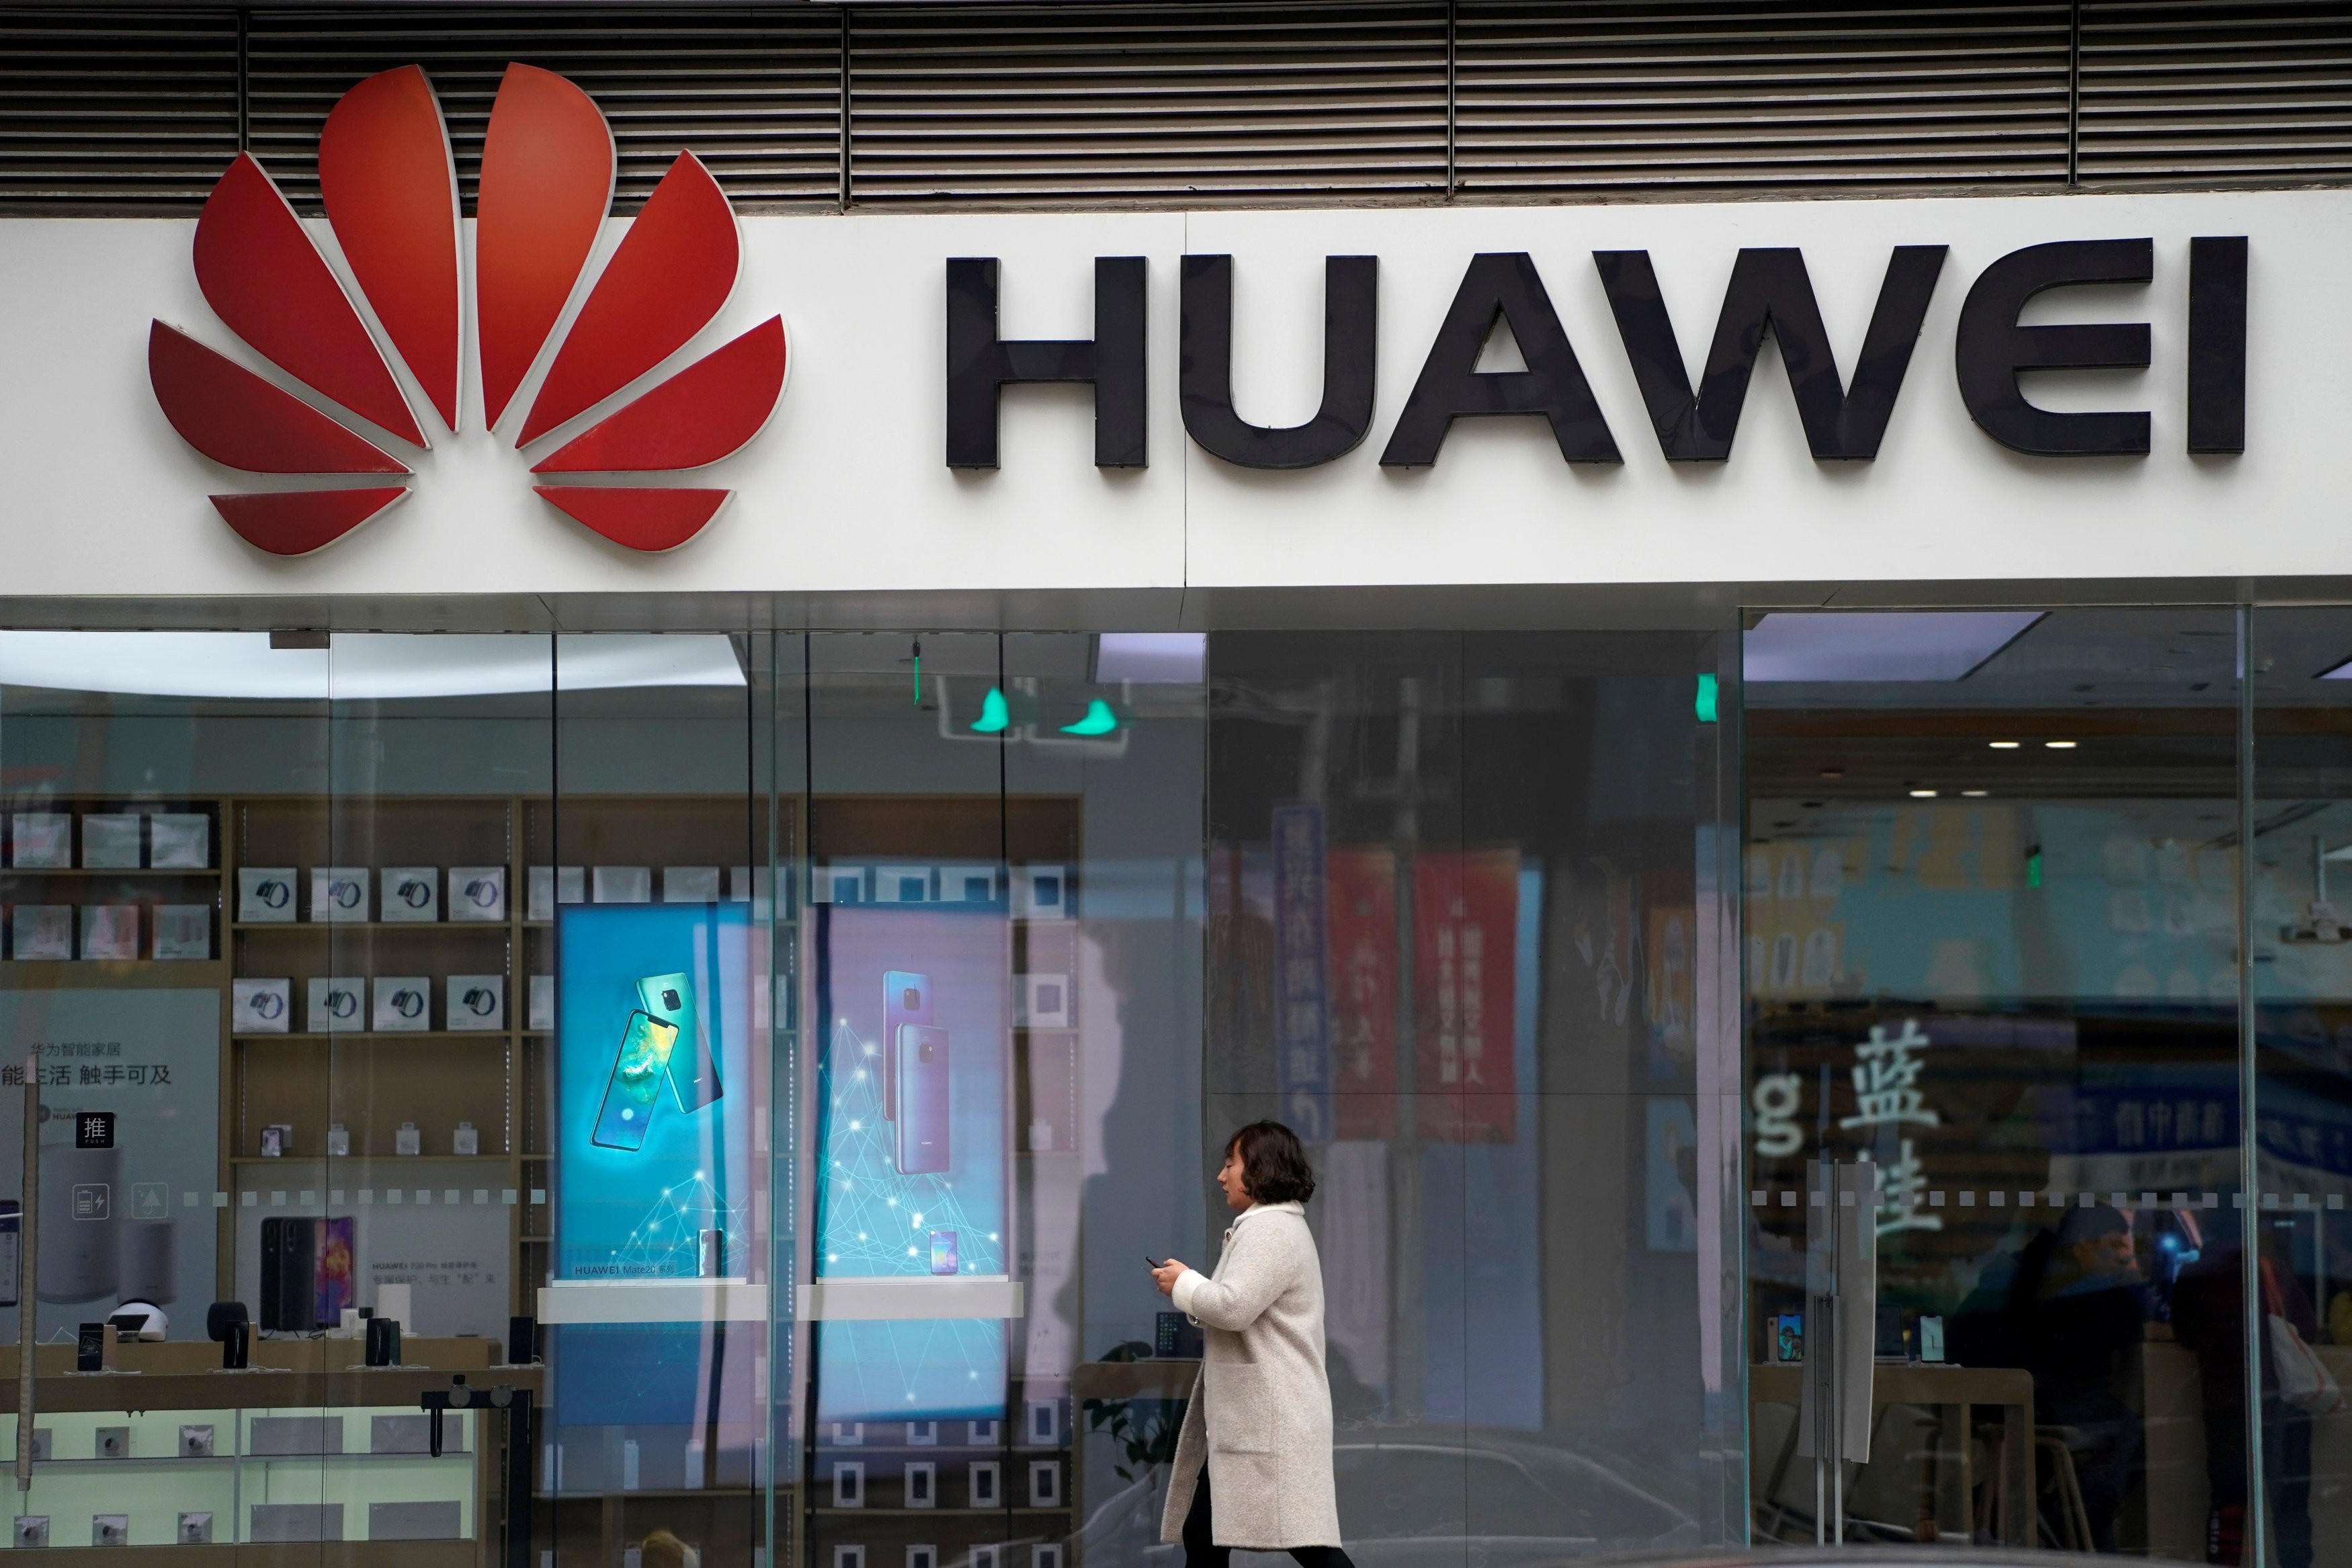 A woman walks by a Huawei logo at a shopping centre in Shanghai in December. The telecoms giant is facing increasing restrictions in countries allied with the US. Photo: Reuters